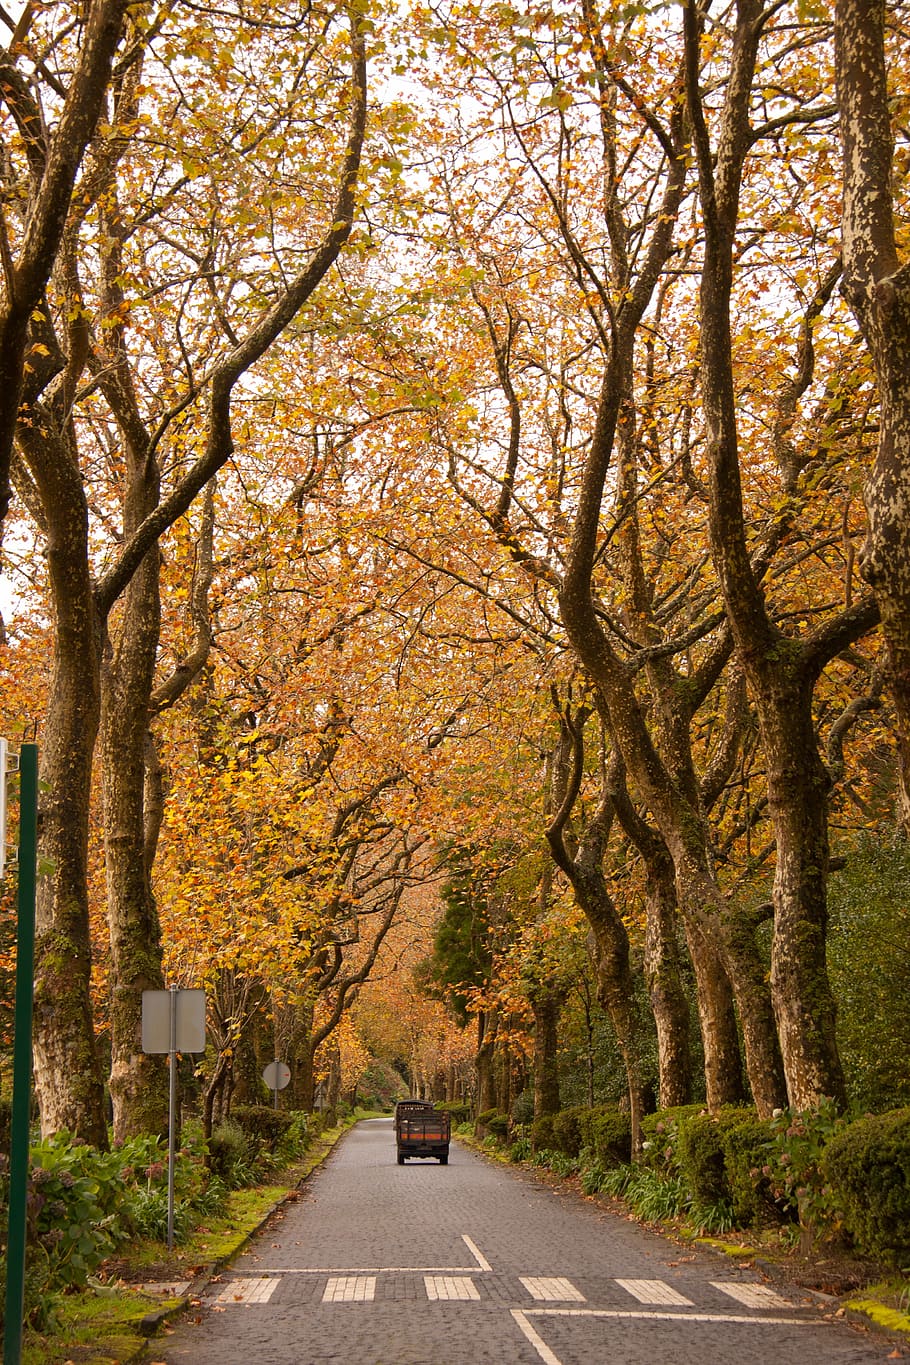 Autumn, Forest, Woods, Trees, Road, trafic, branches, brownish